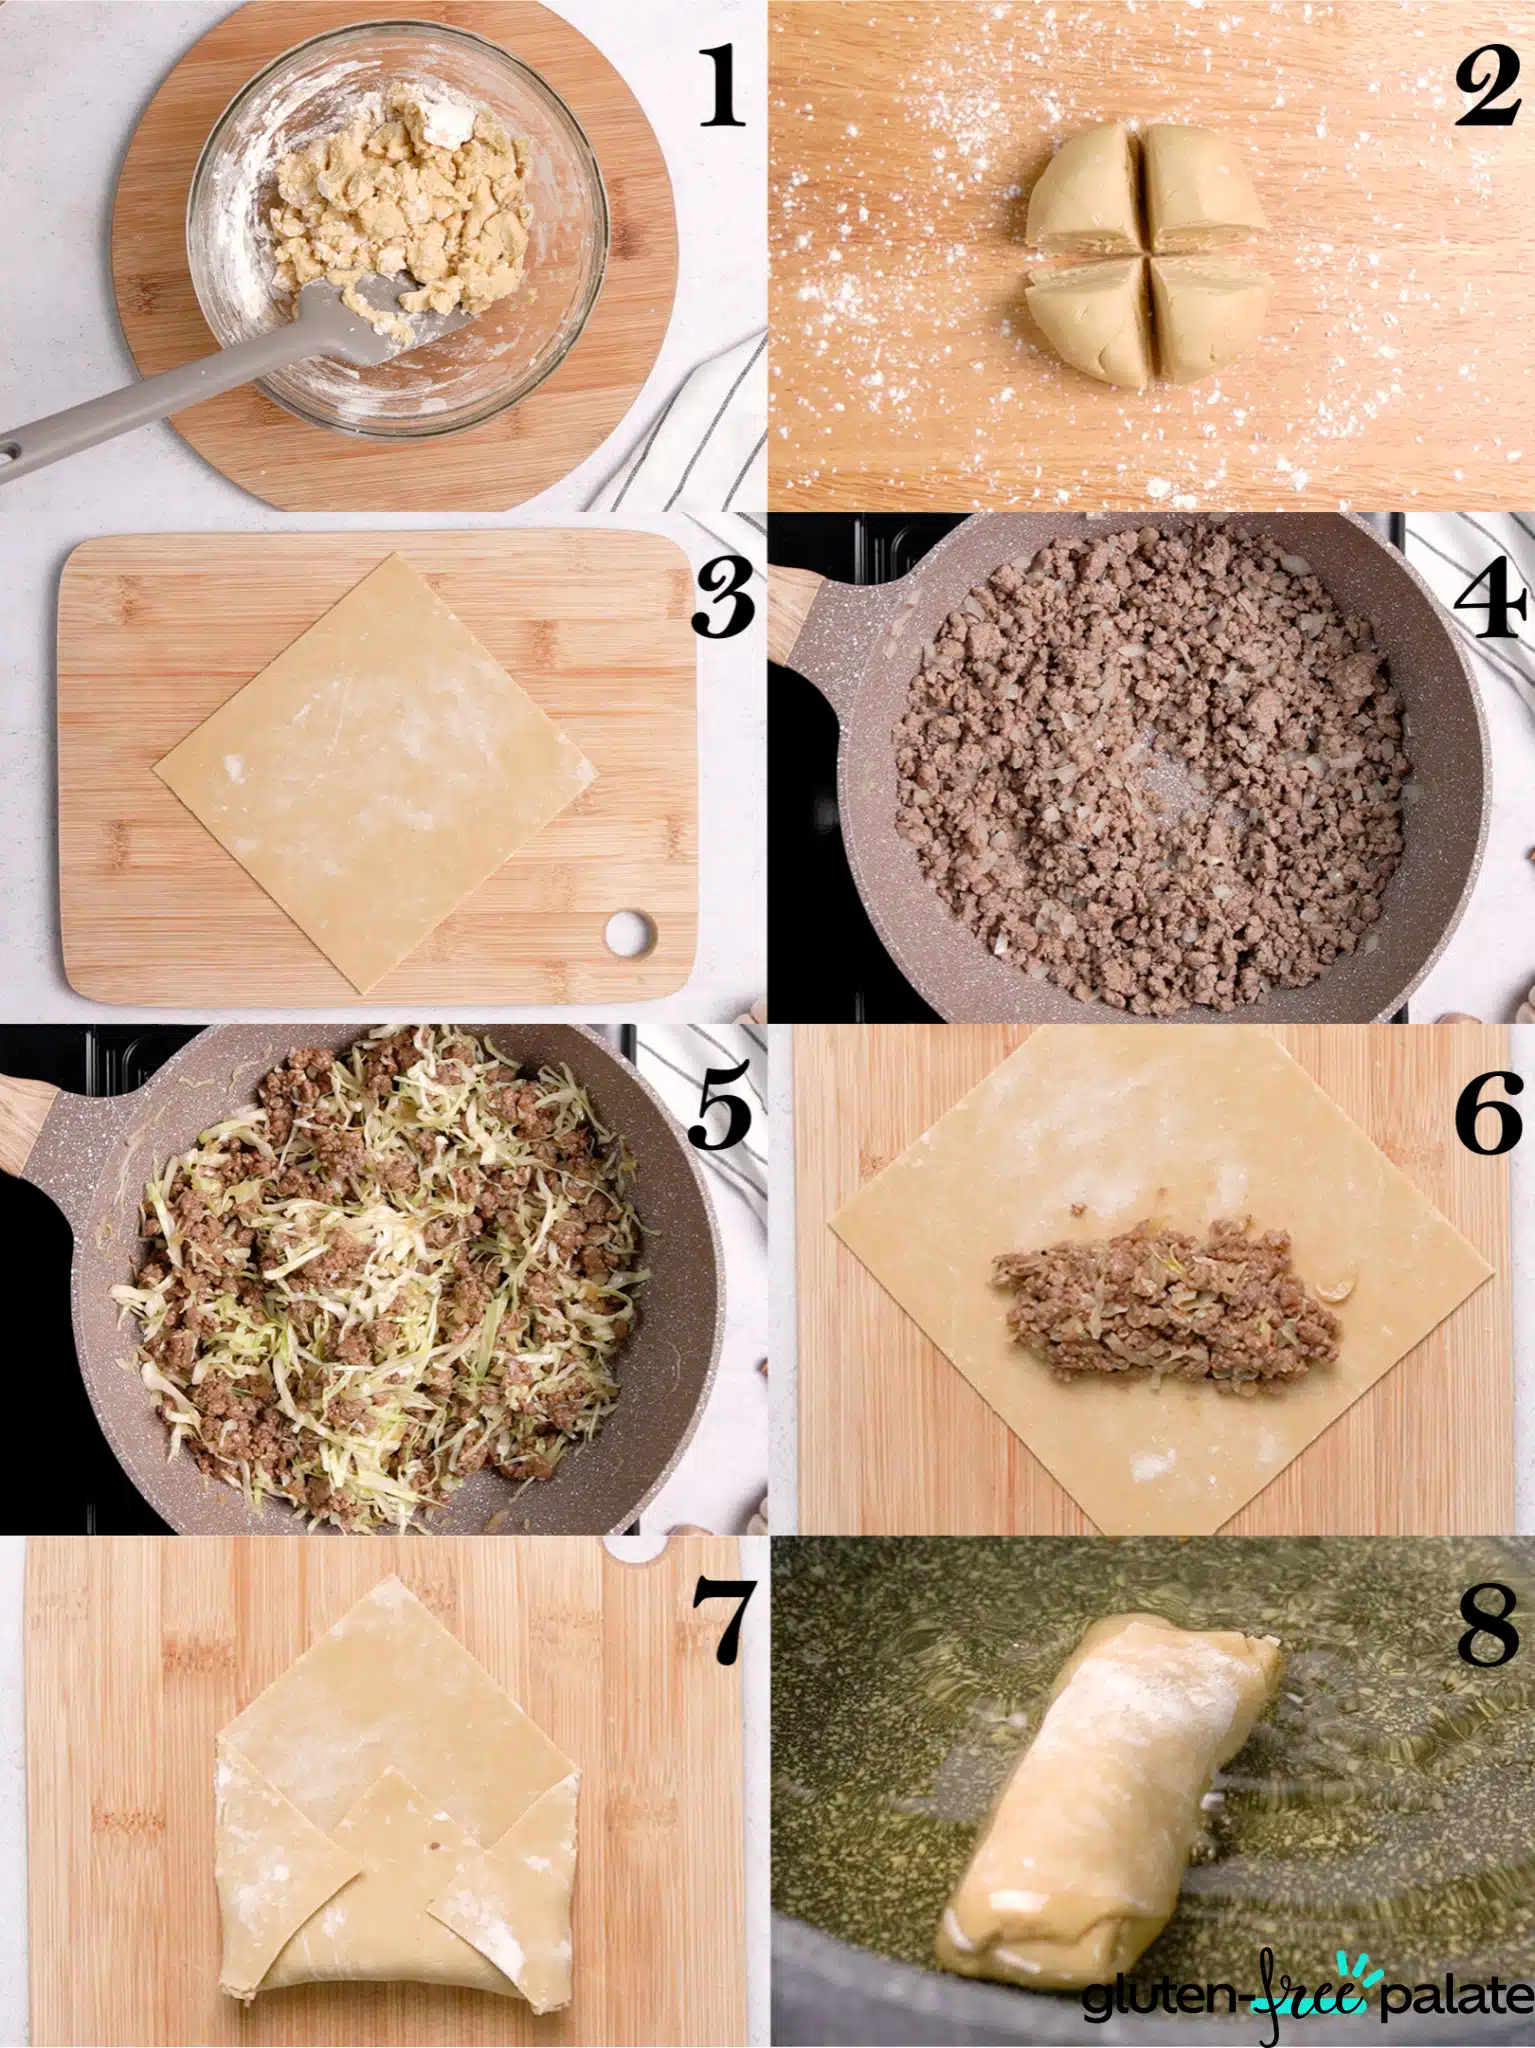 gluten-free egg roll step by step to make gluten-free egg roll wrappers.